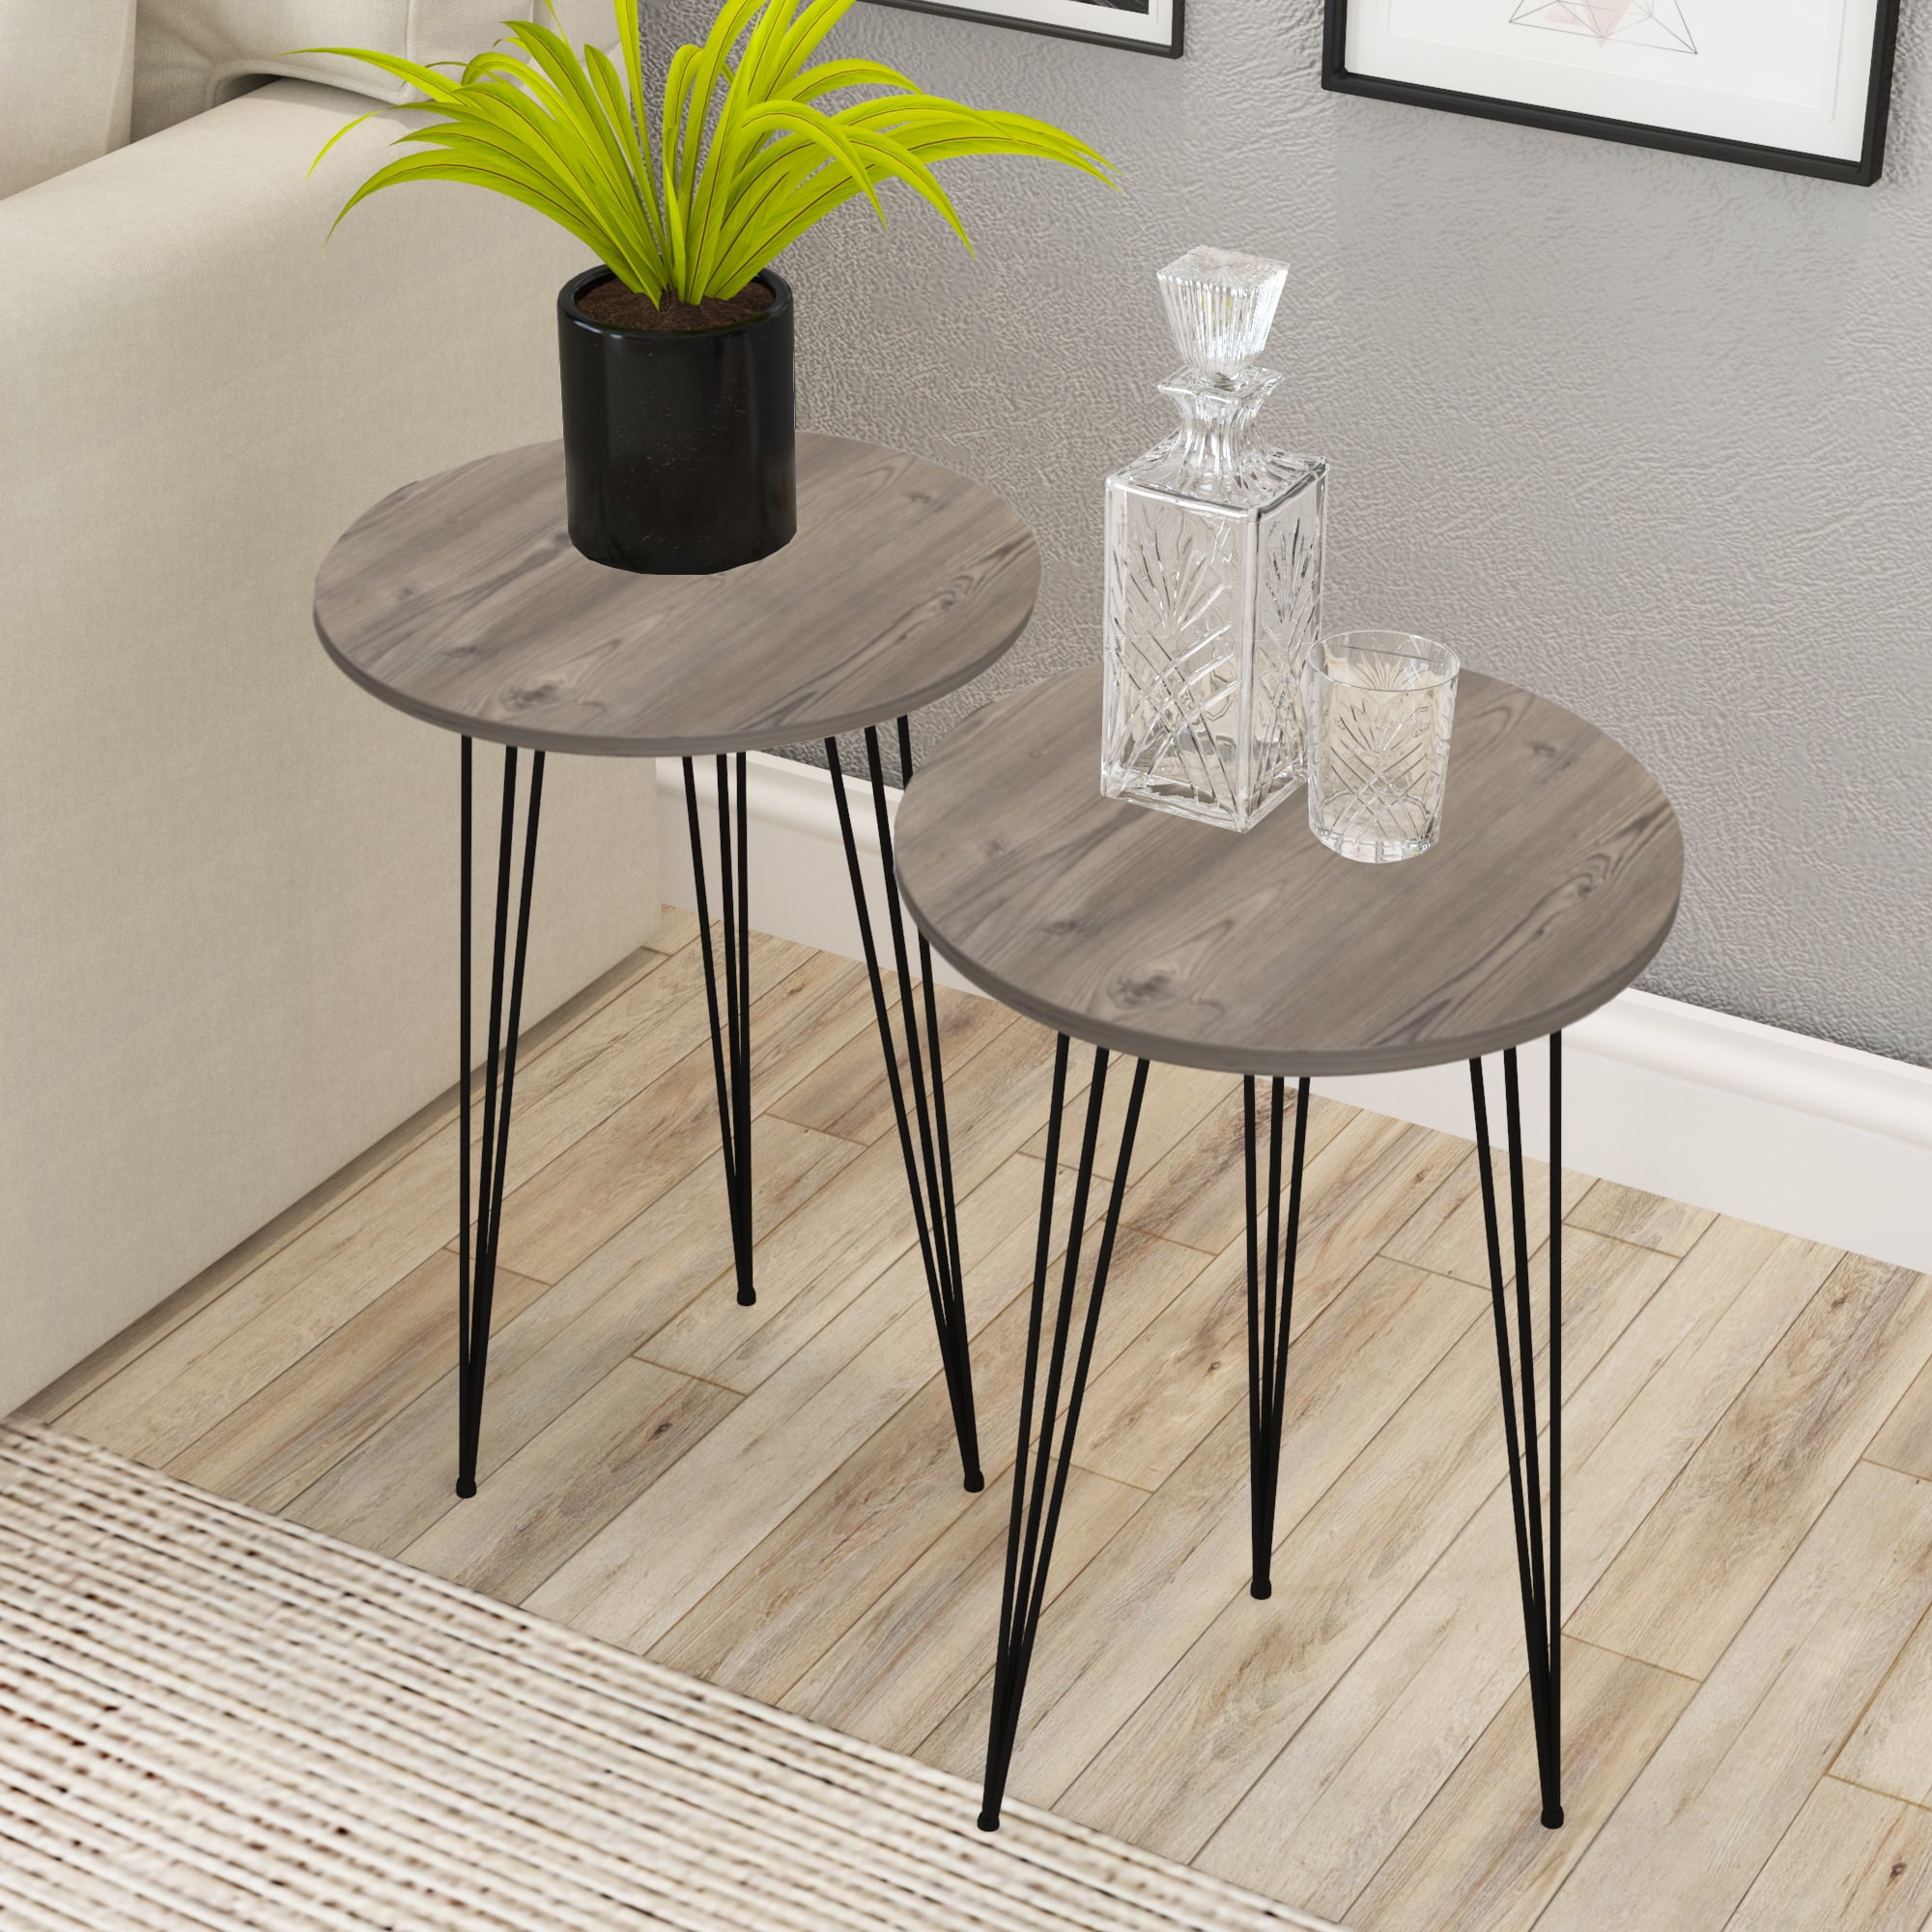 Gray Home Office PAK Home Pine Wood Round Stacking Coffee Side Accent Tables with Metal Legs for Living Room Set of 3 Nesting END Tables Sturdy /& Easy Assembly Nightstands for Bedroom